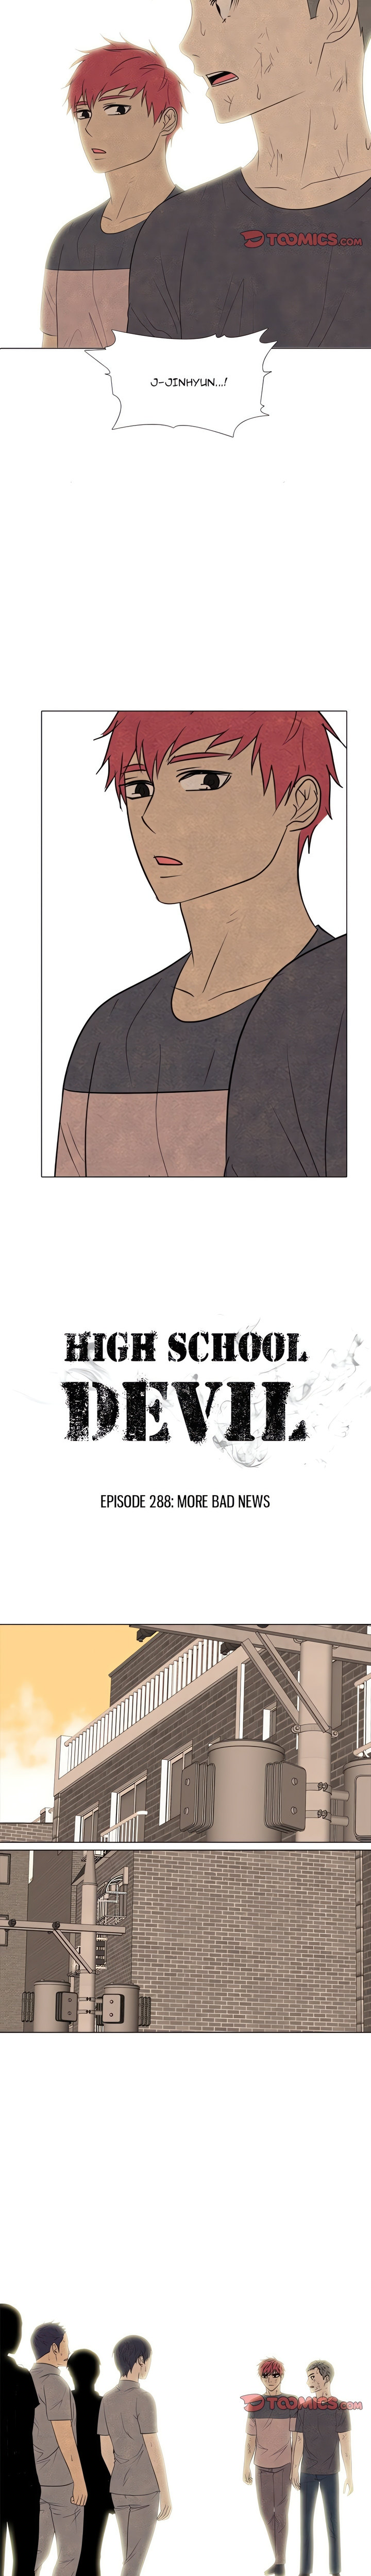 High School Devil - Chapter 288 Page 2